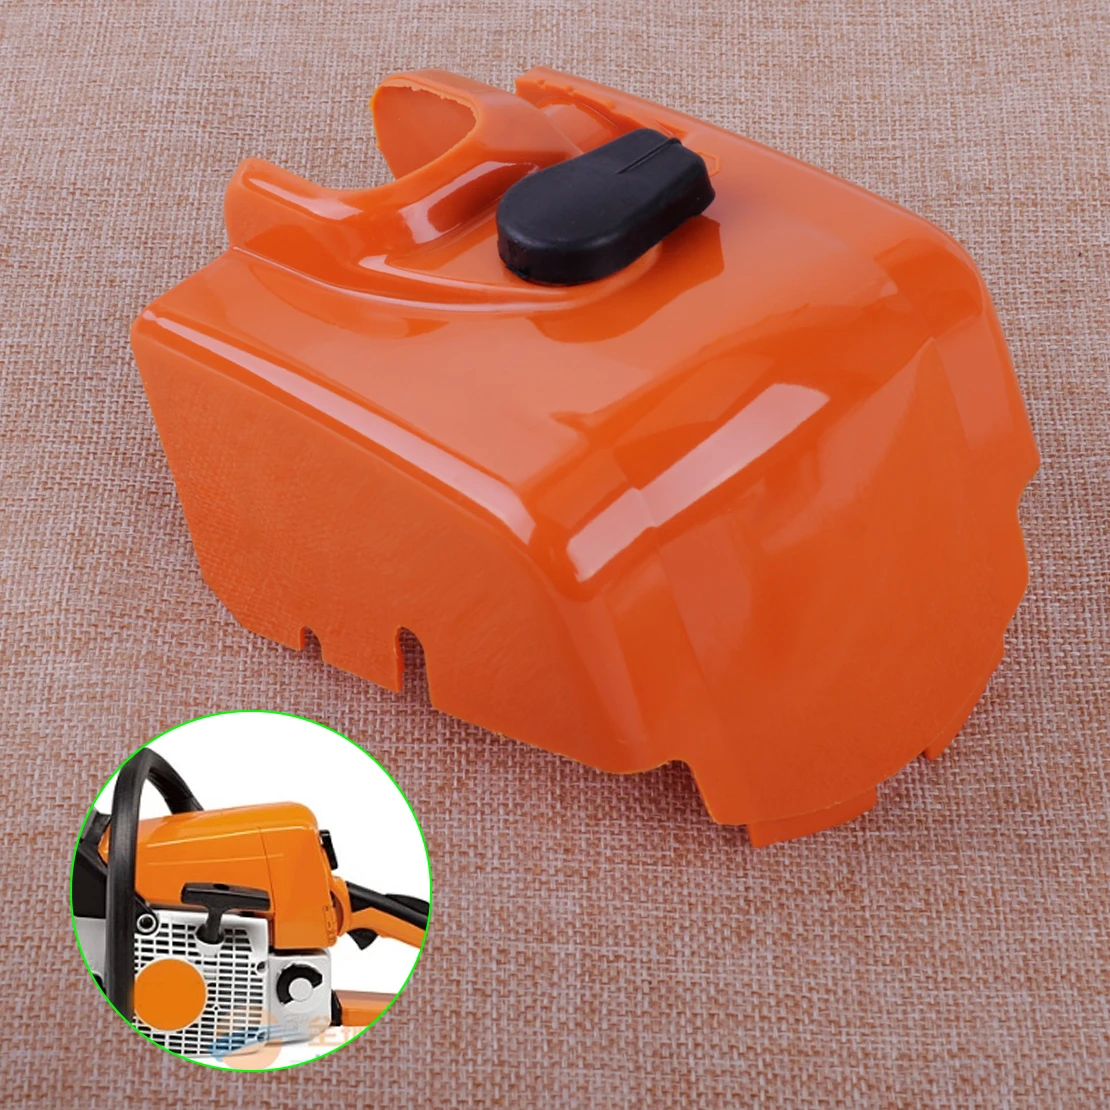 LETAOSK High Quality Air Filter Cover Fit for STIHL 021 023 025 MS250 MS230 MS21 - $56.31